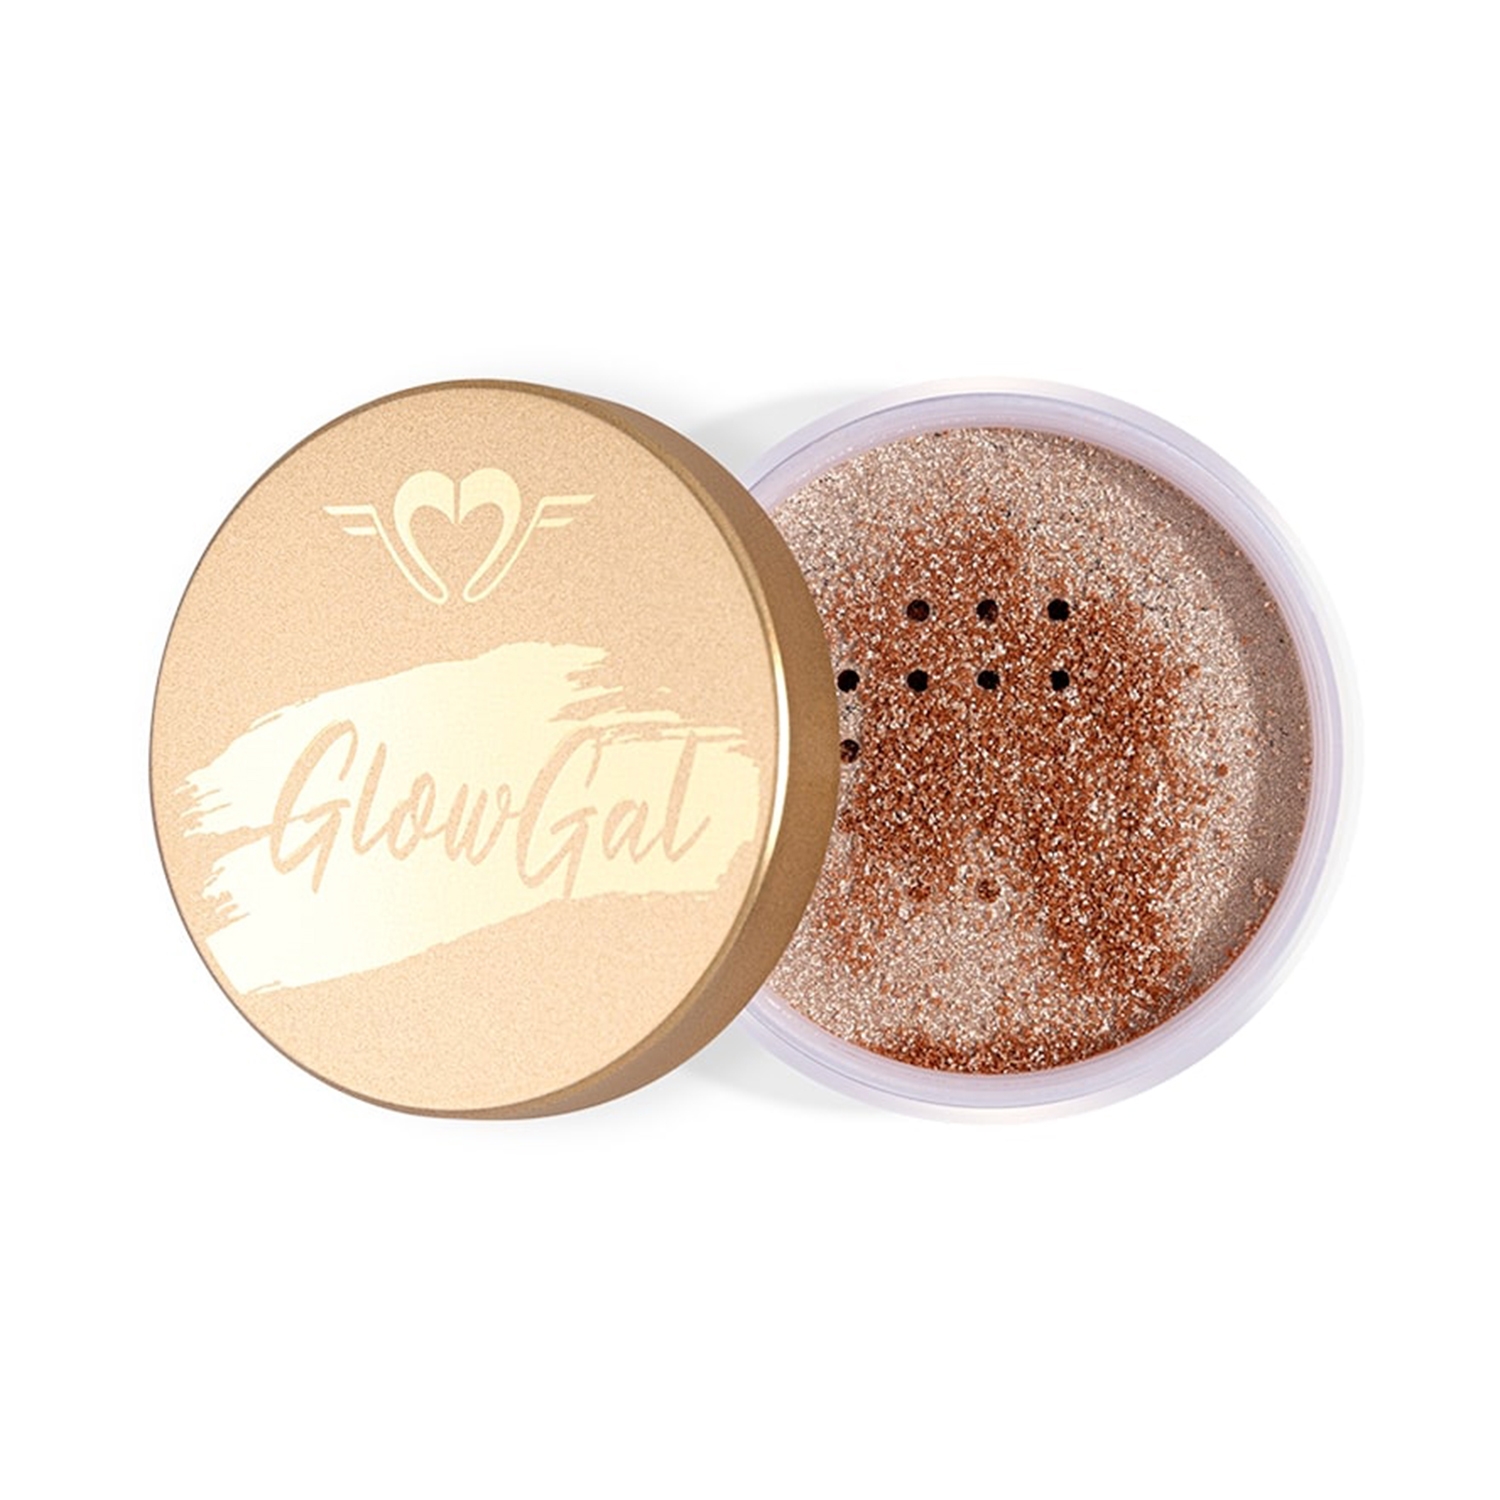 Daily Life Forever52 | Daily Life Forever52 Glow Gal Loose Highlighter GGH001 - Golden Brown (15g)